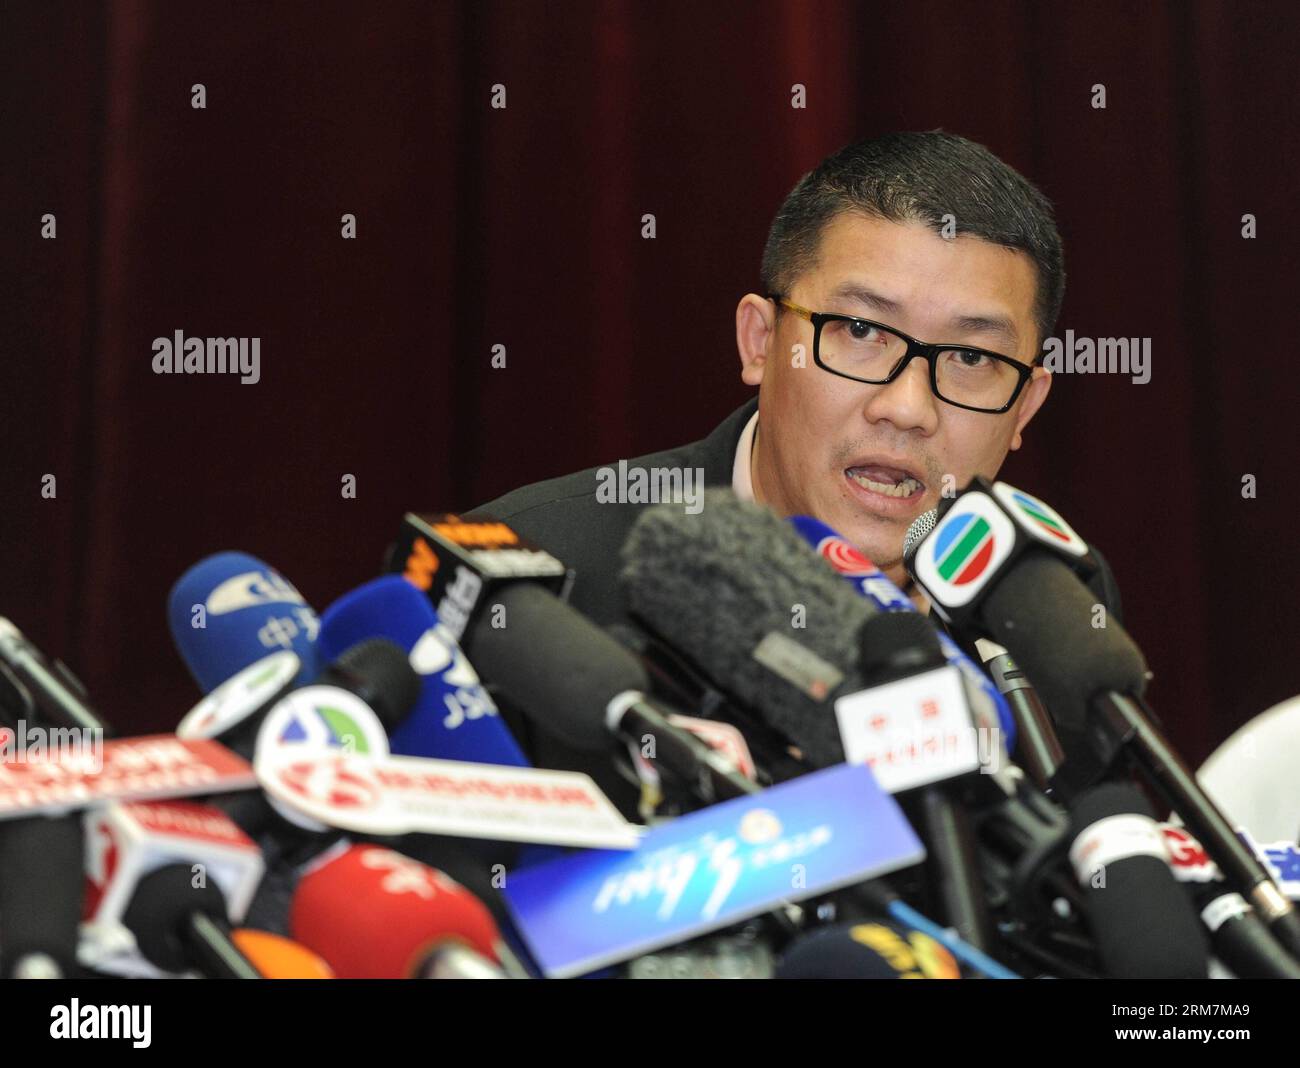 Ignatius Ong Ming Choy, representative of the Malaysia Airlines, speaks during the press conference in Beijing on missing flight MH 370 on March 9, 2014. (Xinhua/Luo Xiaoguang) CHINA-BEIJING-MALAYSIAN AIRLINES-PRESS (CN) PUBLICATIONxNOTxINxCHN   Ignatius Ong Ming Choy Representative of The Malaysia Airlines Speaks during The Press Conference in Beijing ON Missing Flight MH 370 ON March 9 2014 XINHUA Luo Xiaoguang China Beijing Malaysian Airlines Press CN PUBLICATIONxNOTxINxCHN Stock Photo